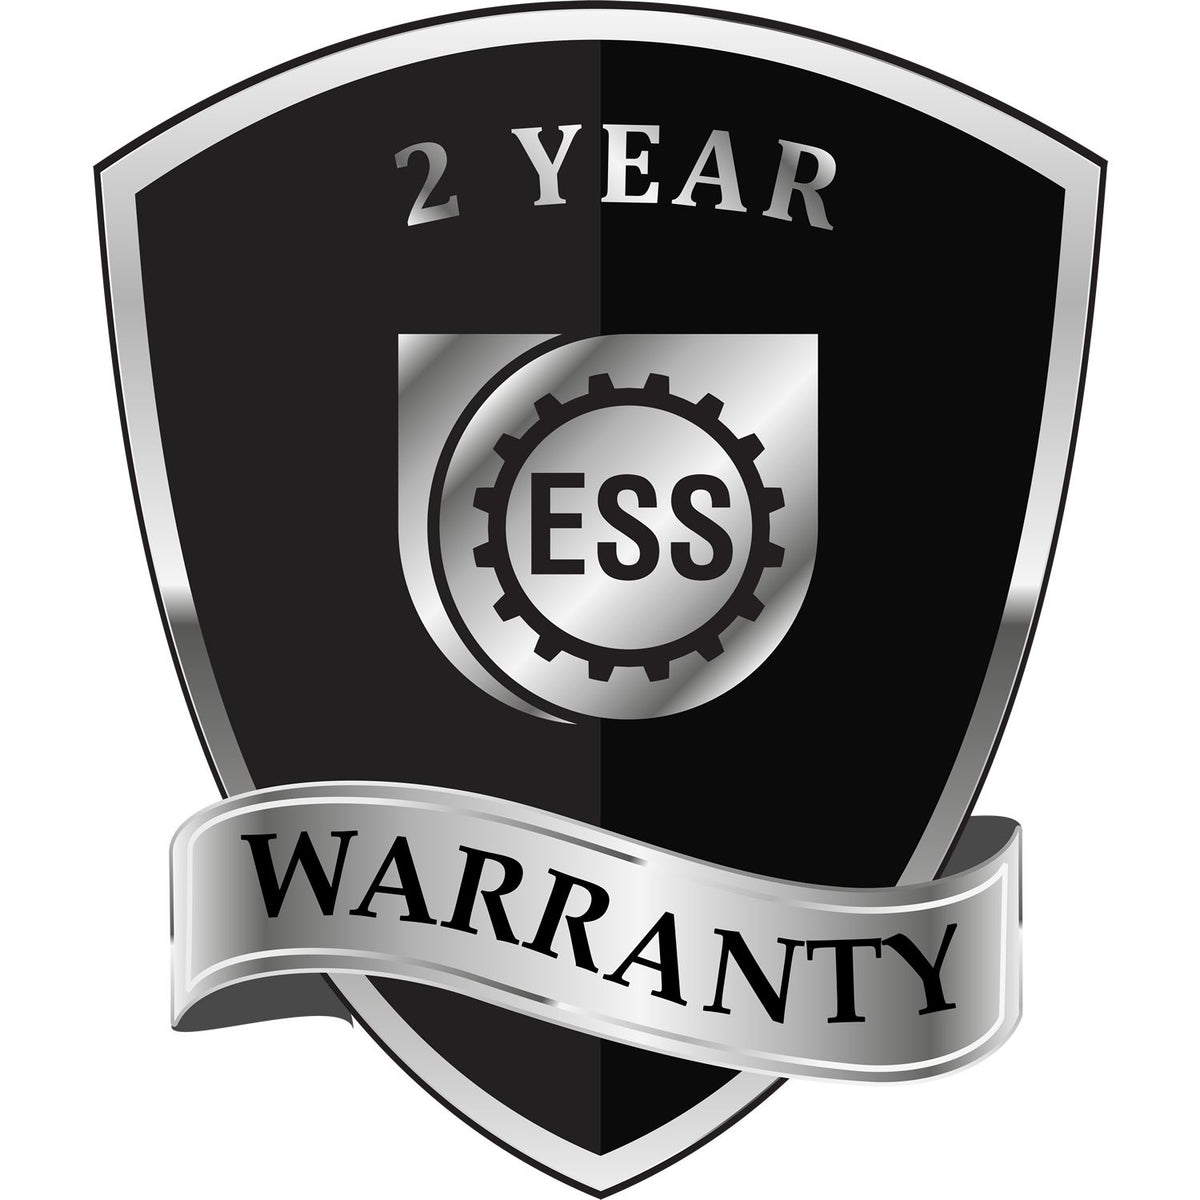 A badge or emblem showing a warranty icon for the Soft Florida Professional Engineer Seal